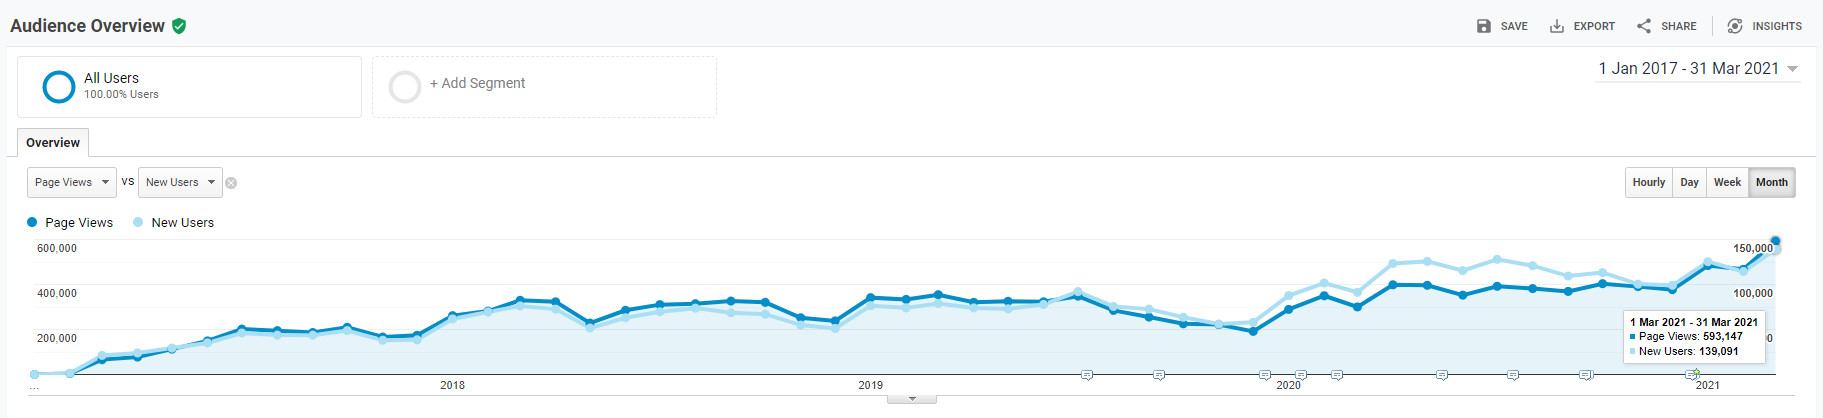 Page Views & New Users Growth